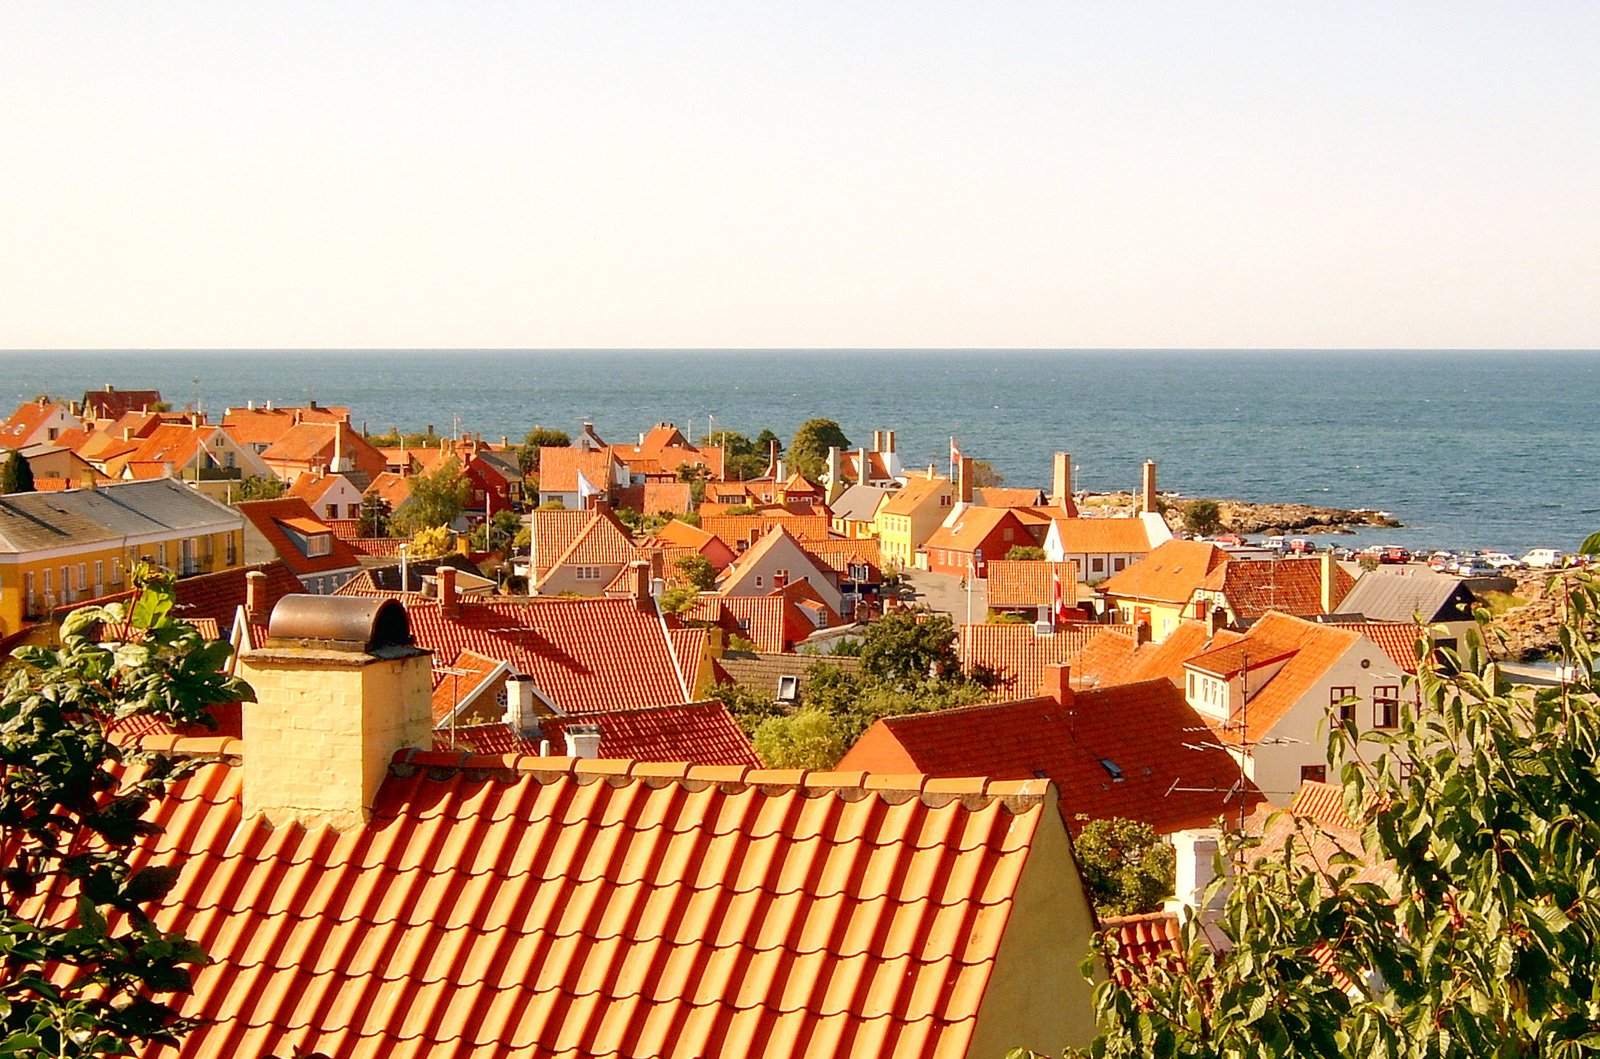 the roofs of small, colorful houses overlooks a vast ocean